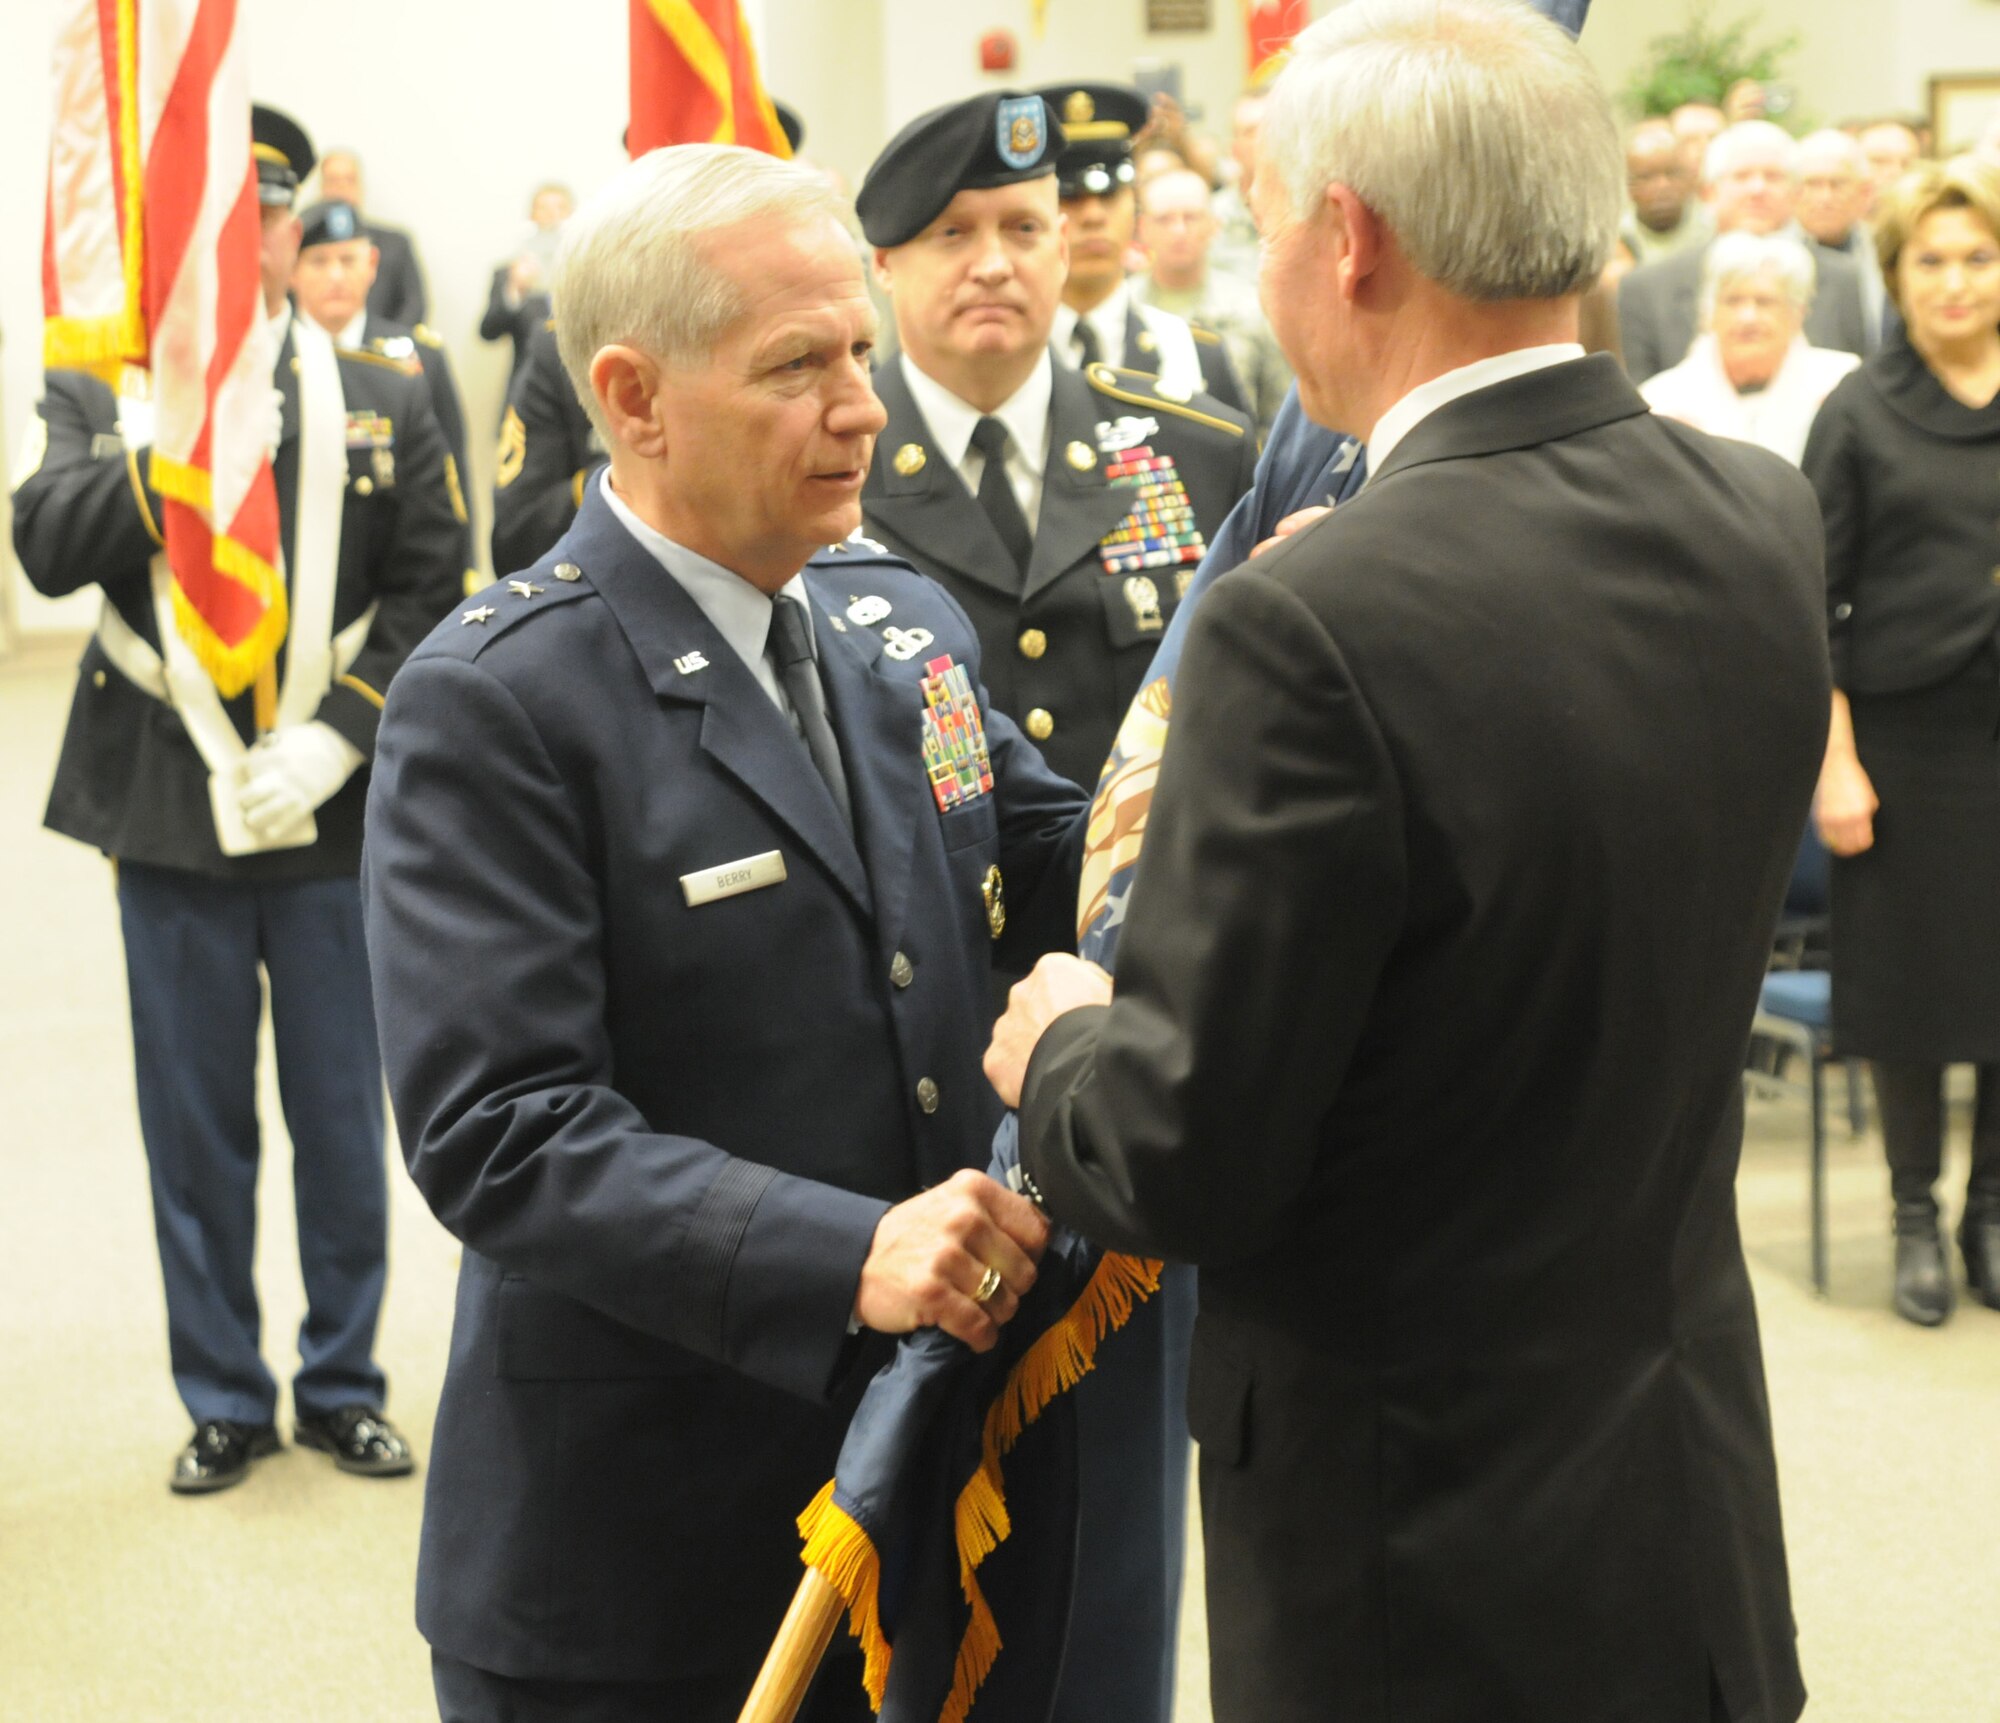 Maj. Gen. Mark H. Berry, the newly appointed adjutant general of the Arkansas National Guard, receives the flag from Governor Asa Hutchinson, symbolizing his assumption of command during a ceremony here. “It is a sincere honor for me to be a part of this team, and it is with great pride that I entrust [Maj.] Gen. Berry with this professional military organization,” reflected Wofford. “I am honored, privileged and humbled to have had the opportunity to help lead this most awesome group of military professionals, our citizen soldiers and airmen.” (Photo taken by Sgt. Alejandro Smith-Antuna/released)